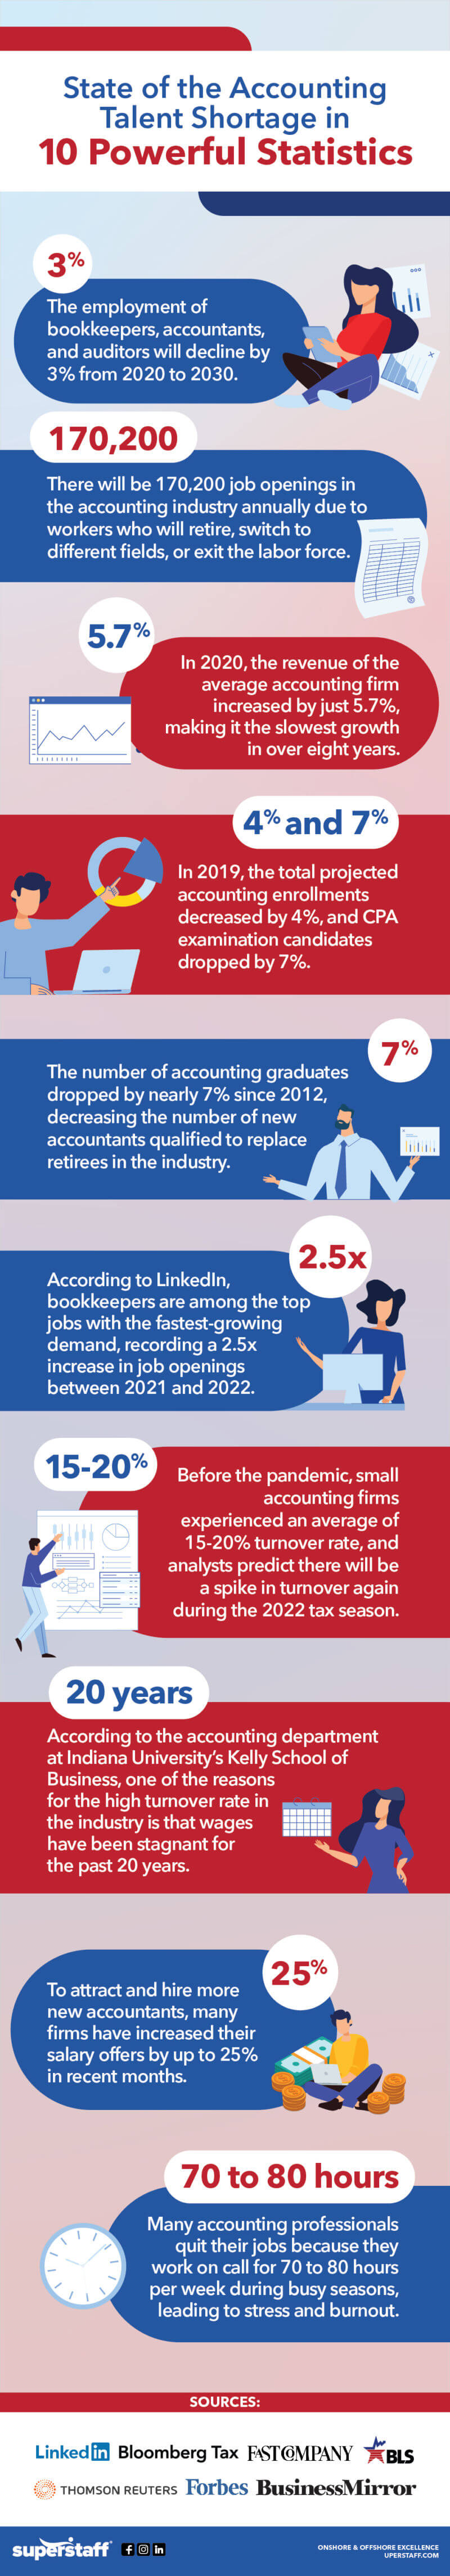 10 Eye-Opening Facts About Accounting Talent Shortage